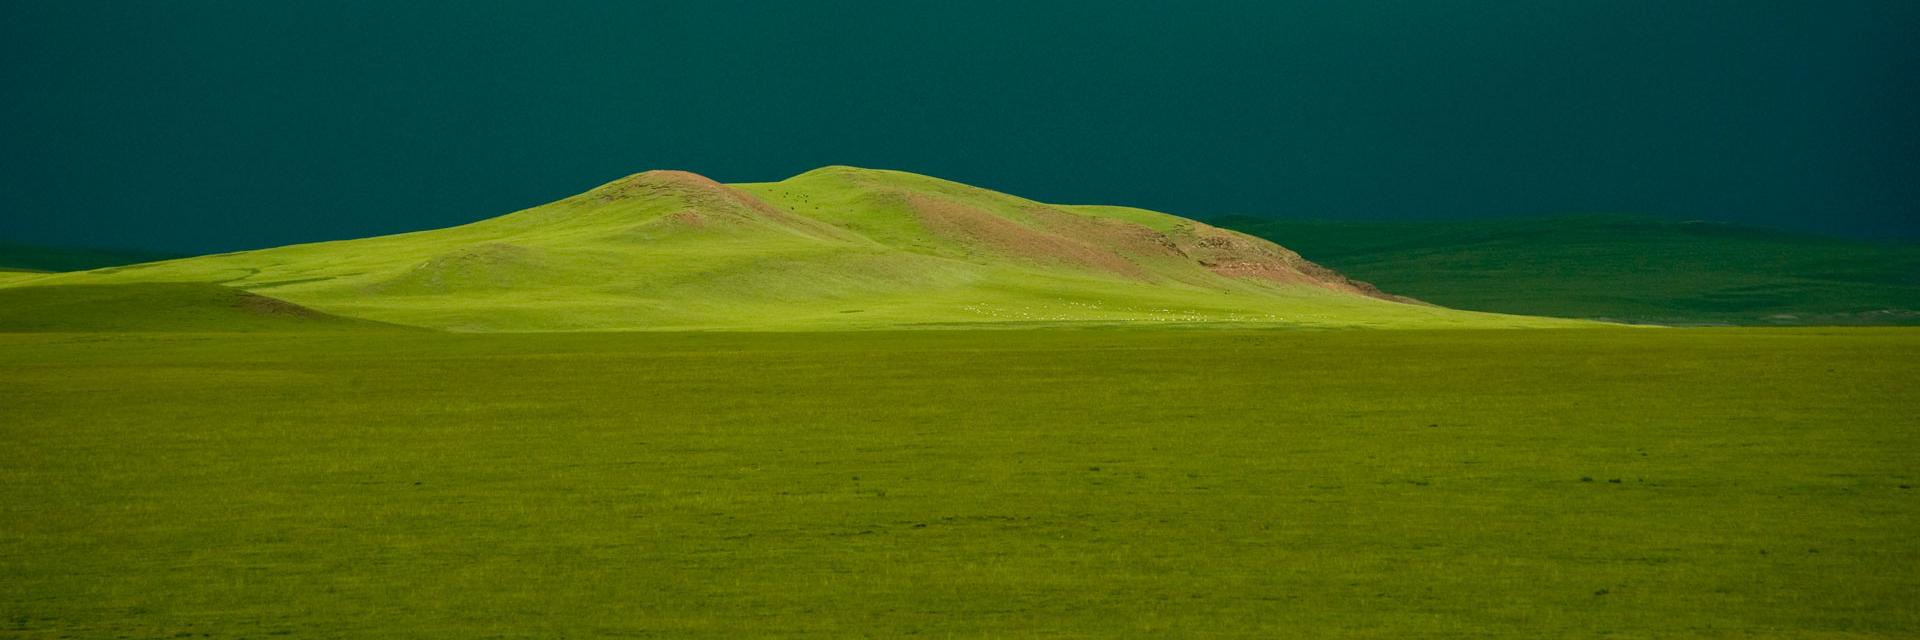 Sunlight on grasslands in the Tibetan Plateau at an elevation of over 13,000 feet.